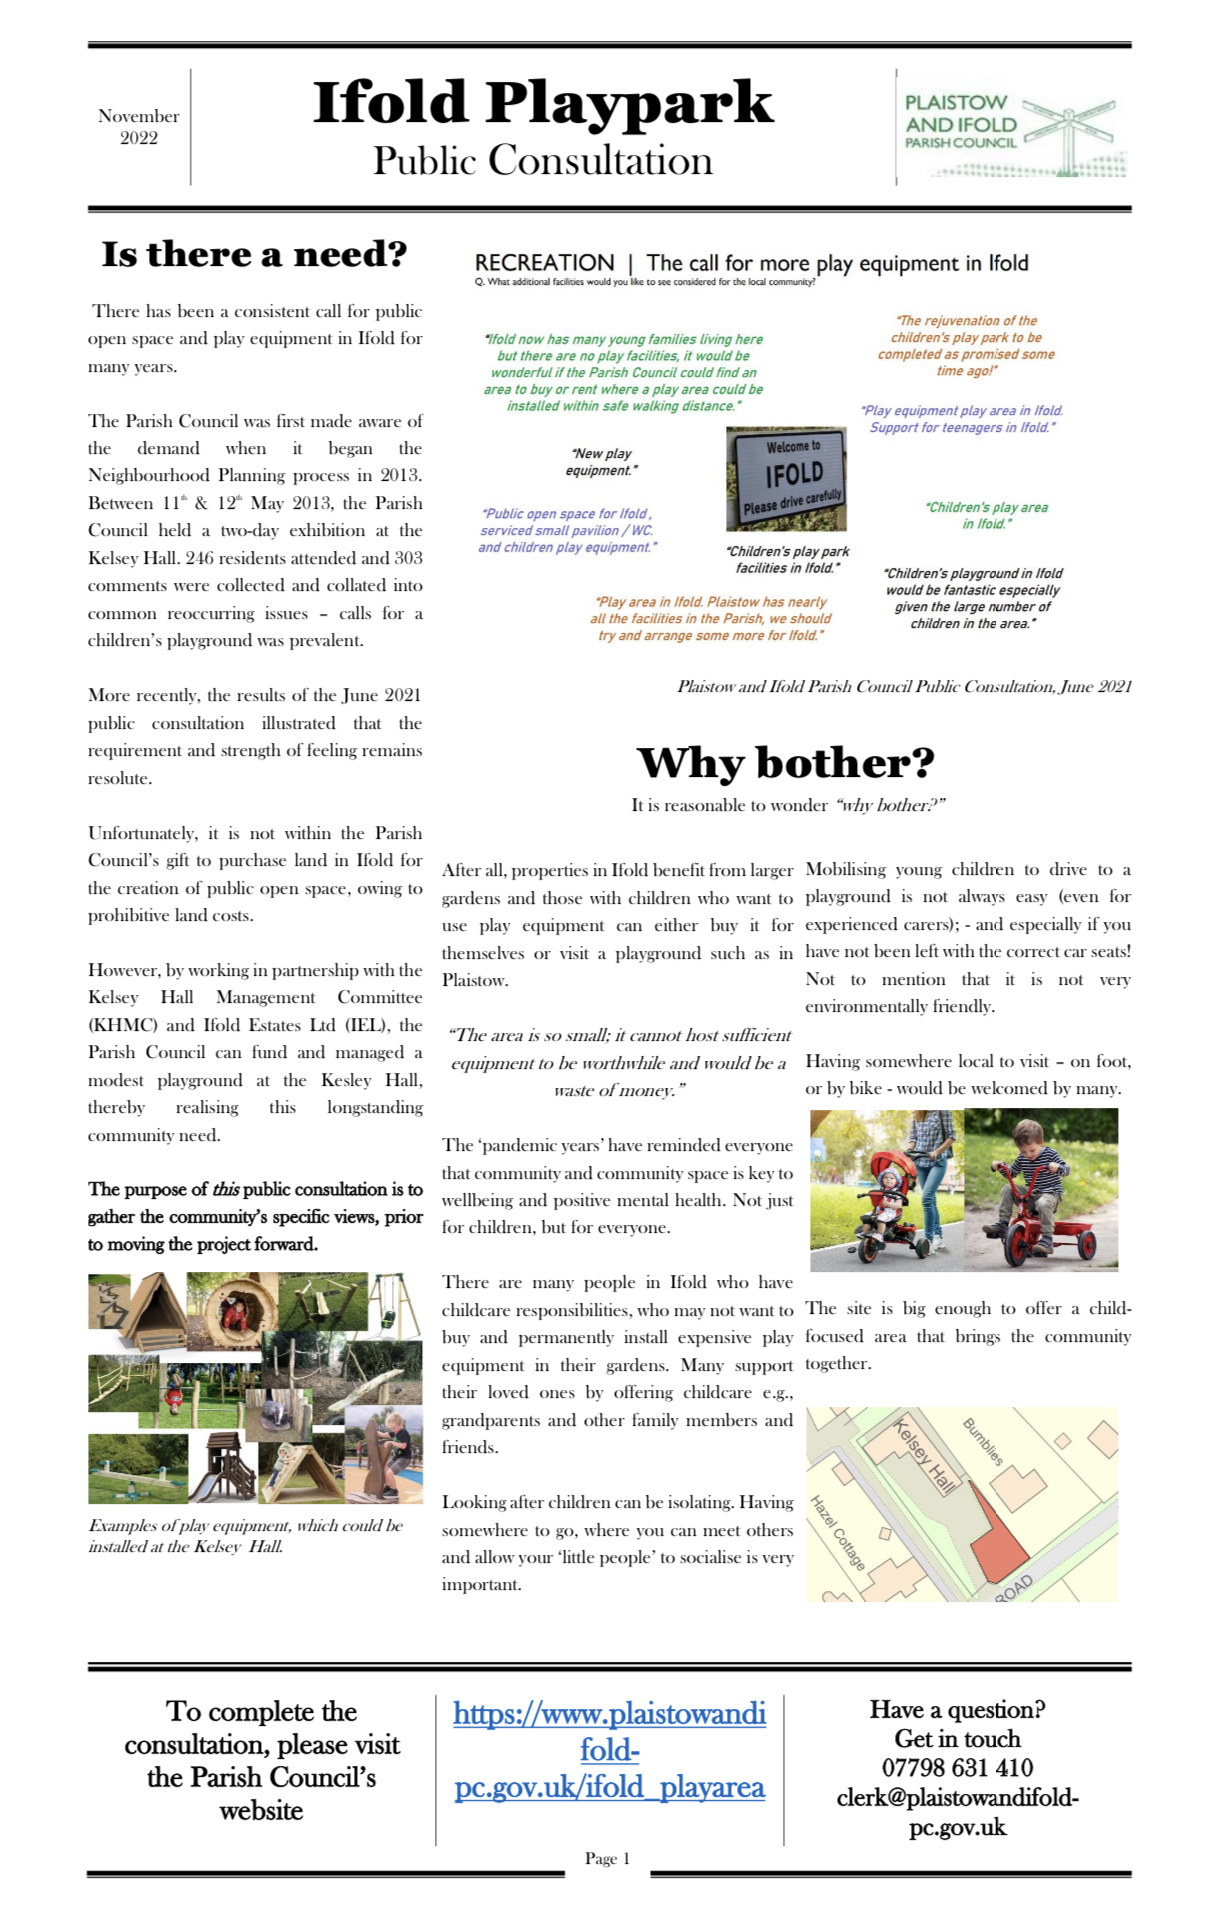 Newsletter information about the play area, page 1